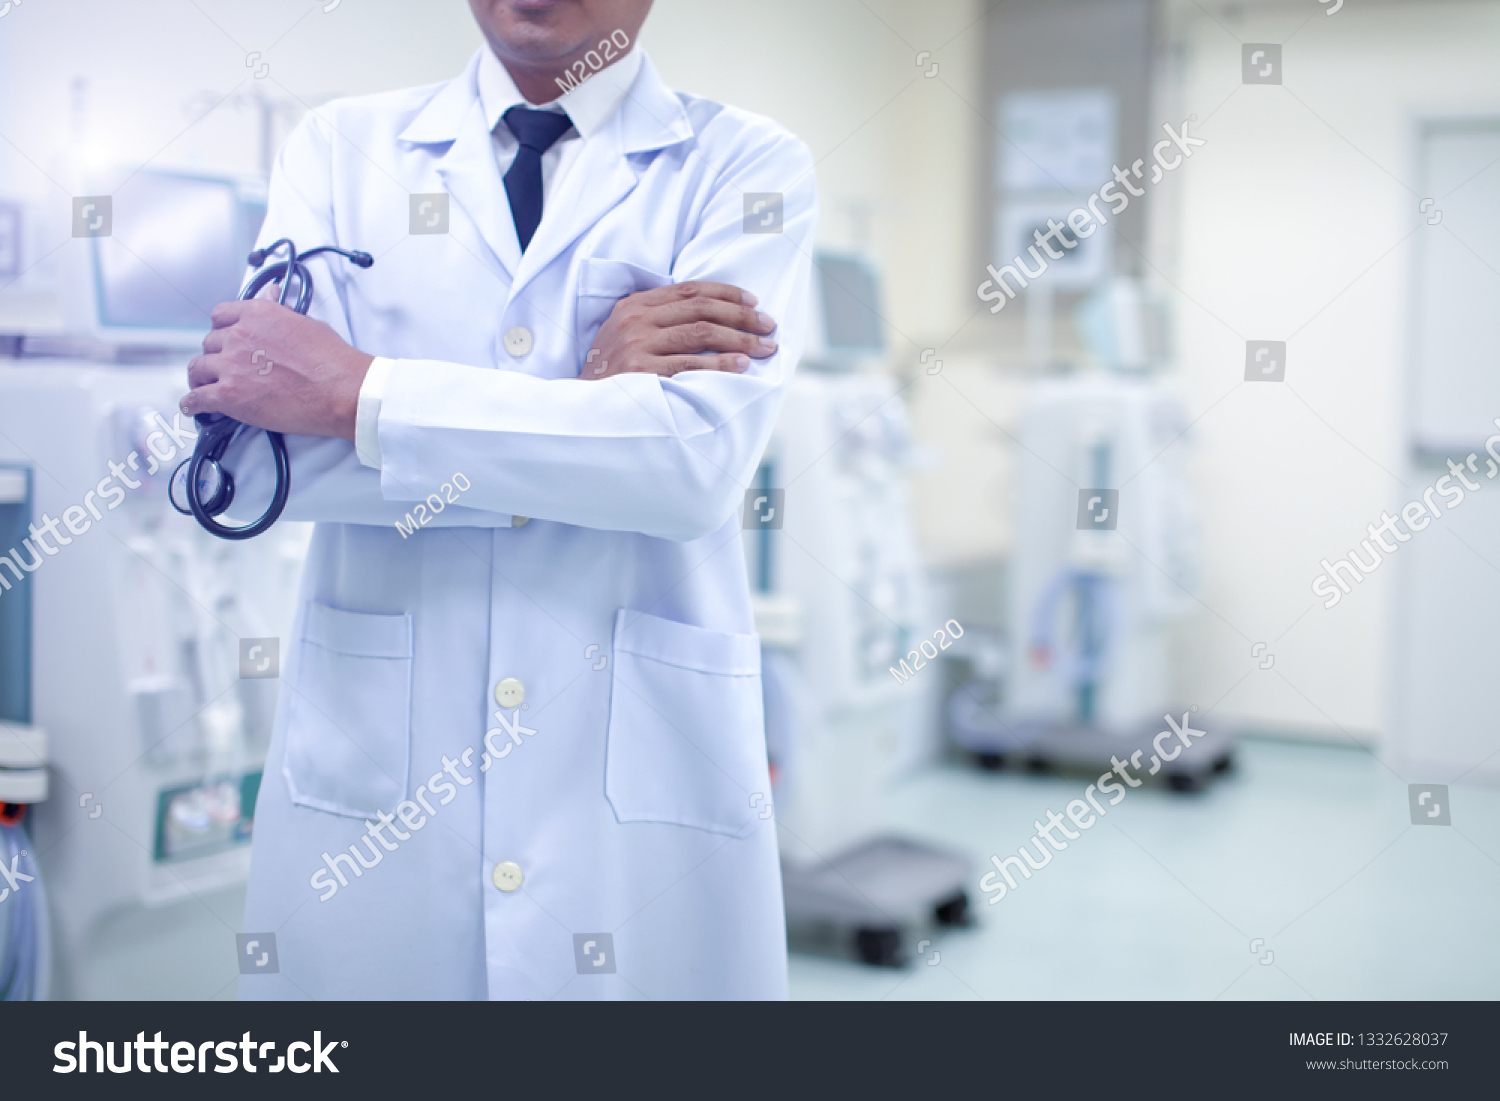 Doctor and advanced dialysis equipment in hospital,Concept for commercial business #1332628037